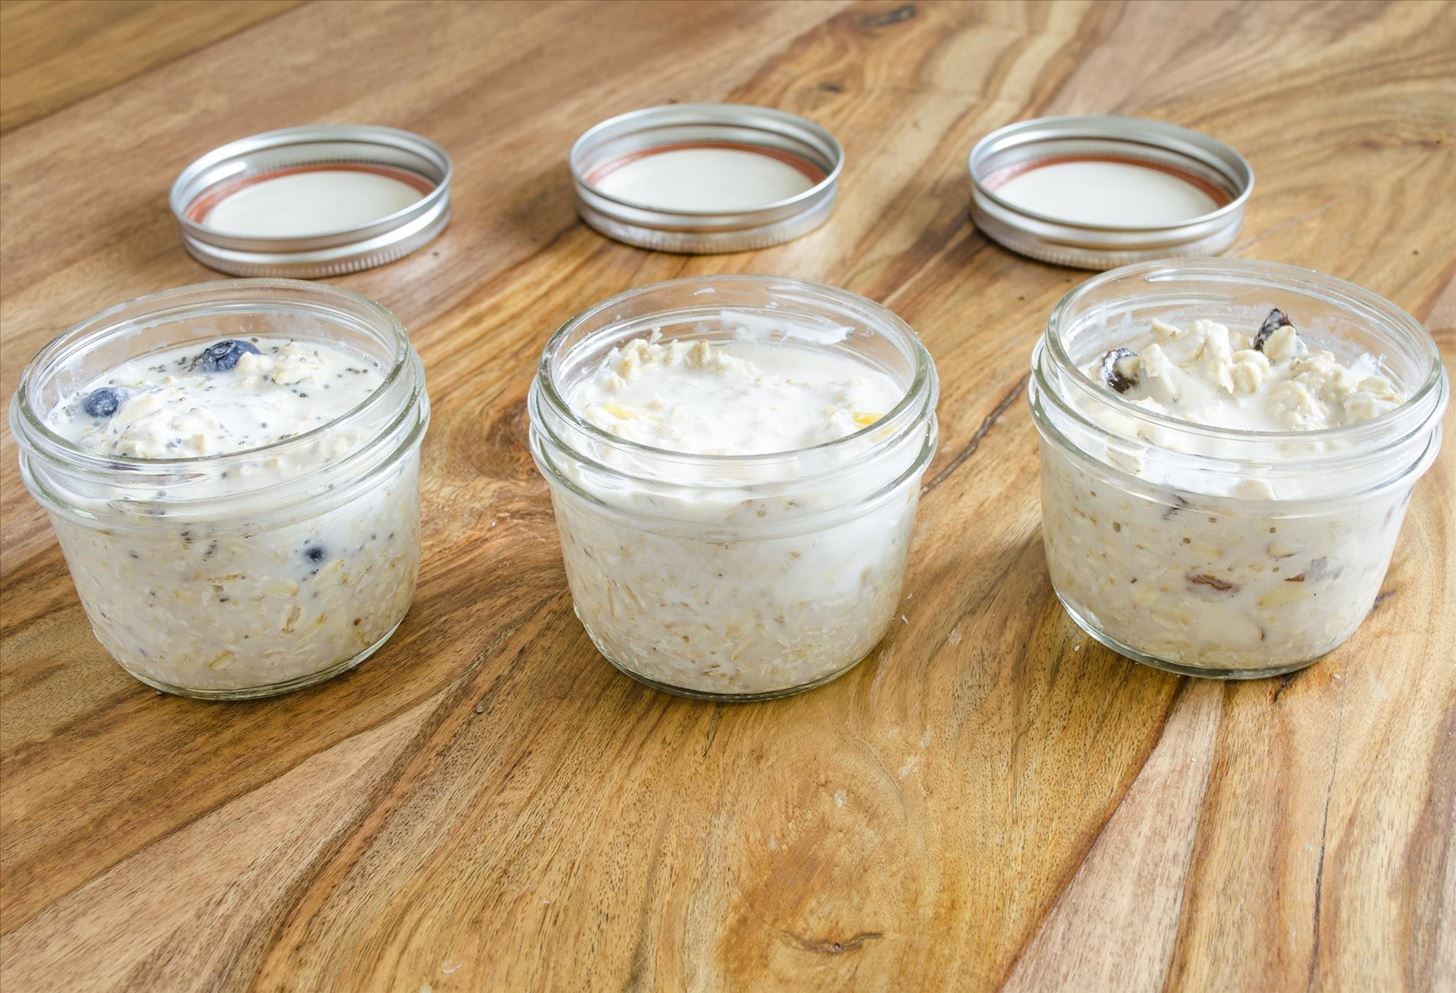 Prep Oats Overnight for Easy Grab-&-Go Breakfasts All Week